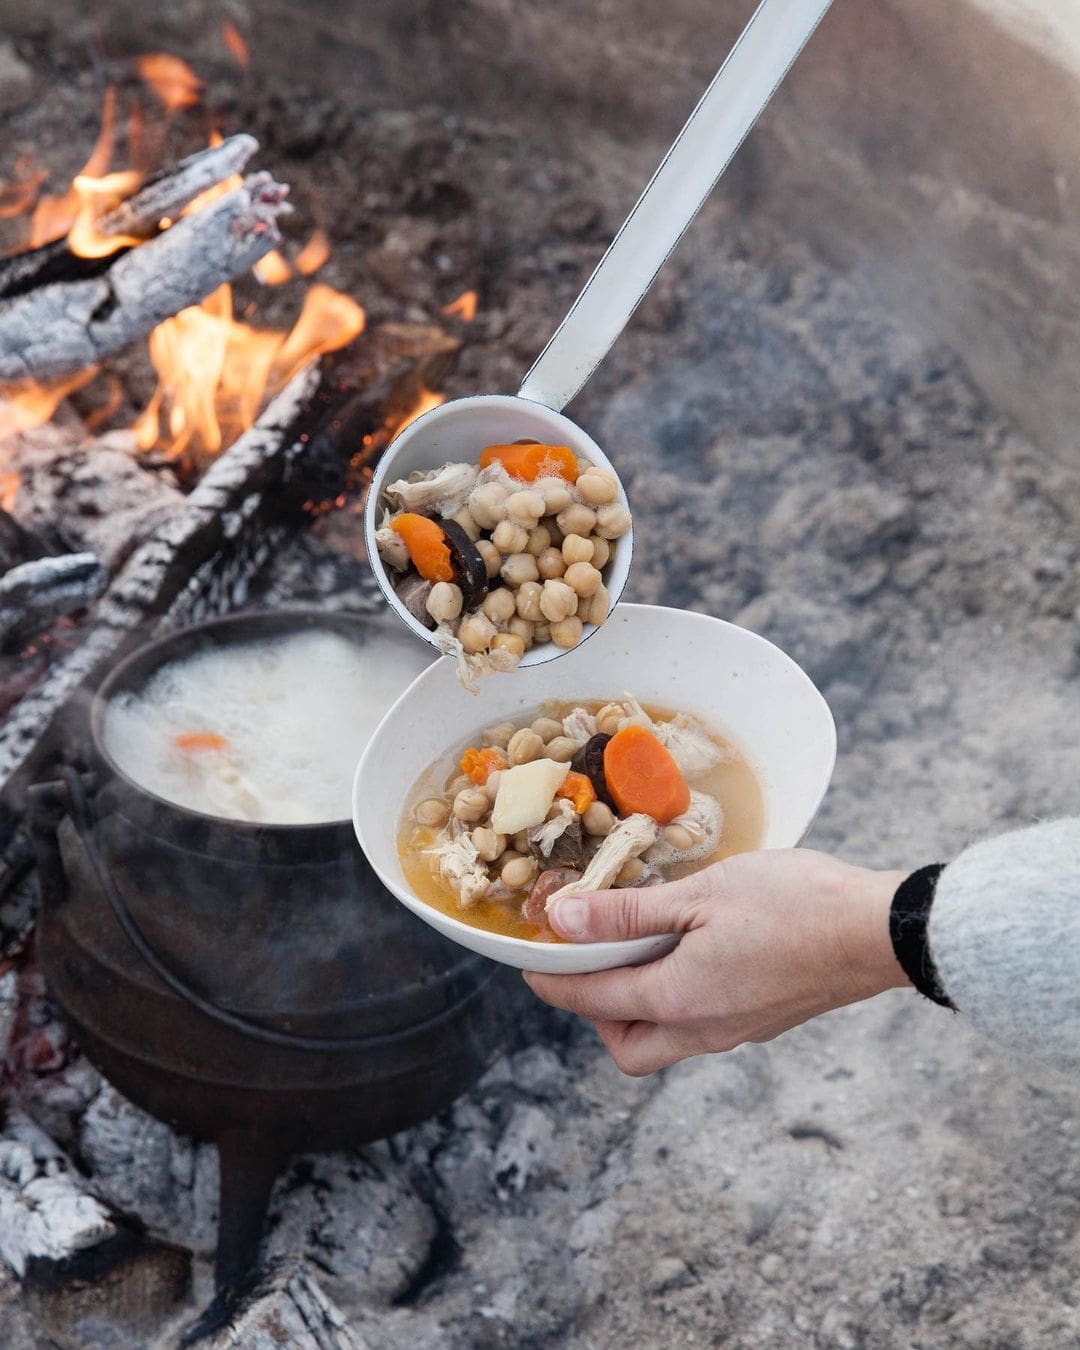 The best farm stays in Europe | a dish of vegetables cooked on an open fire